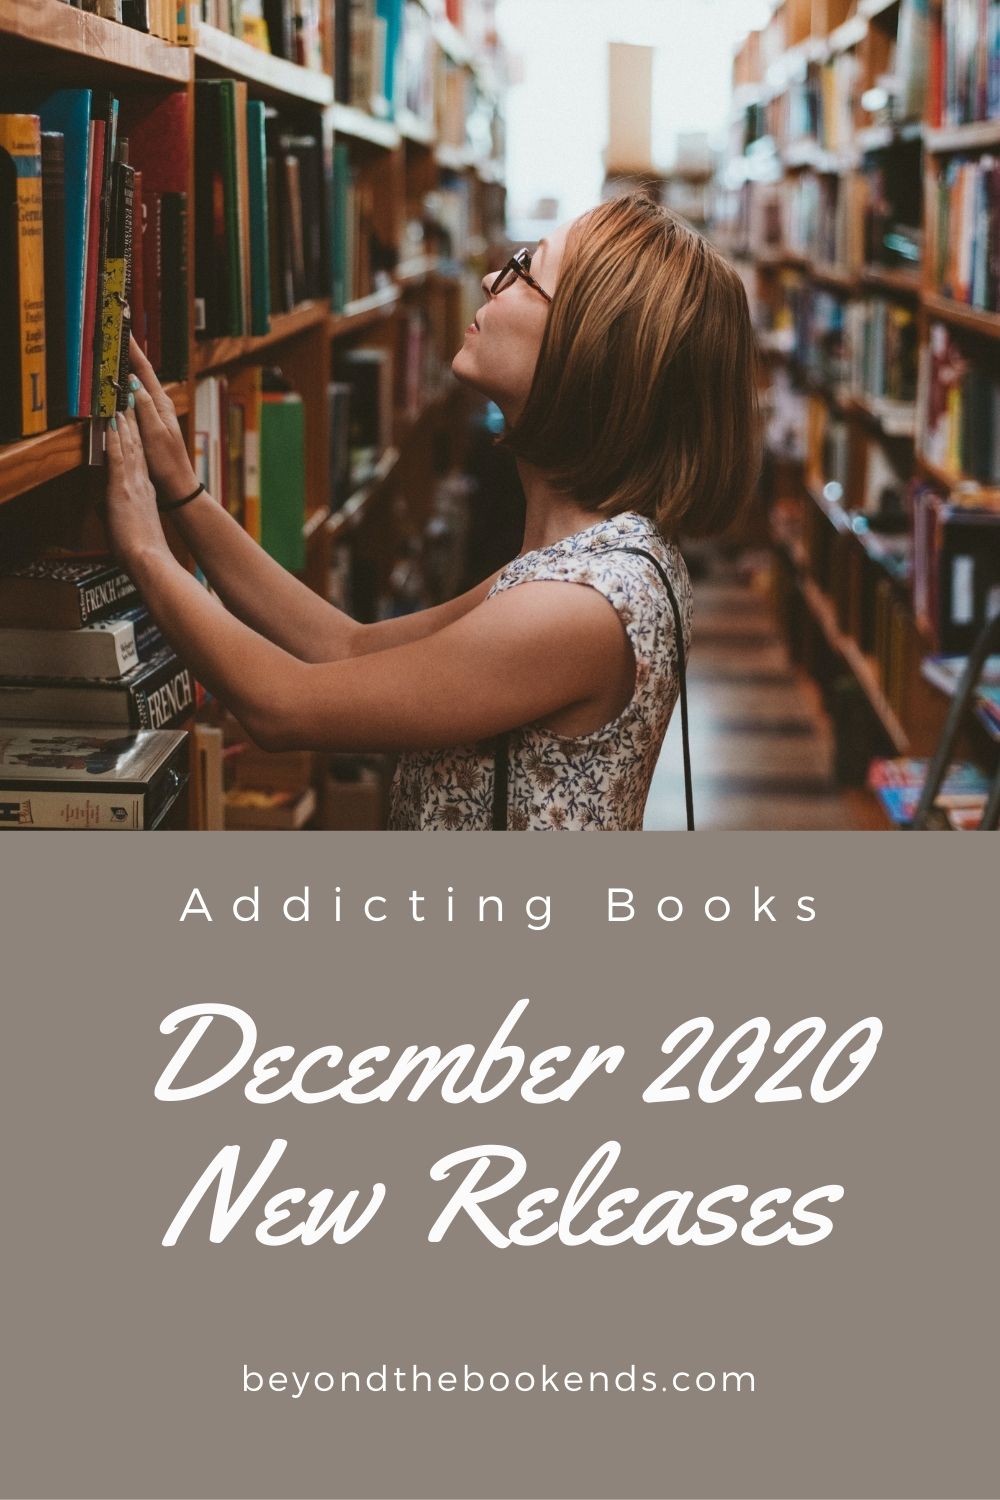 End 2020 with a great book. The hottest new releases coming Dec. 2020!